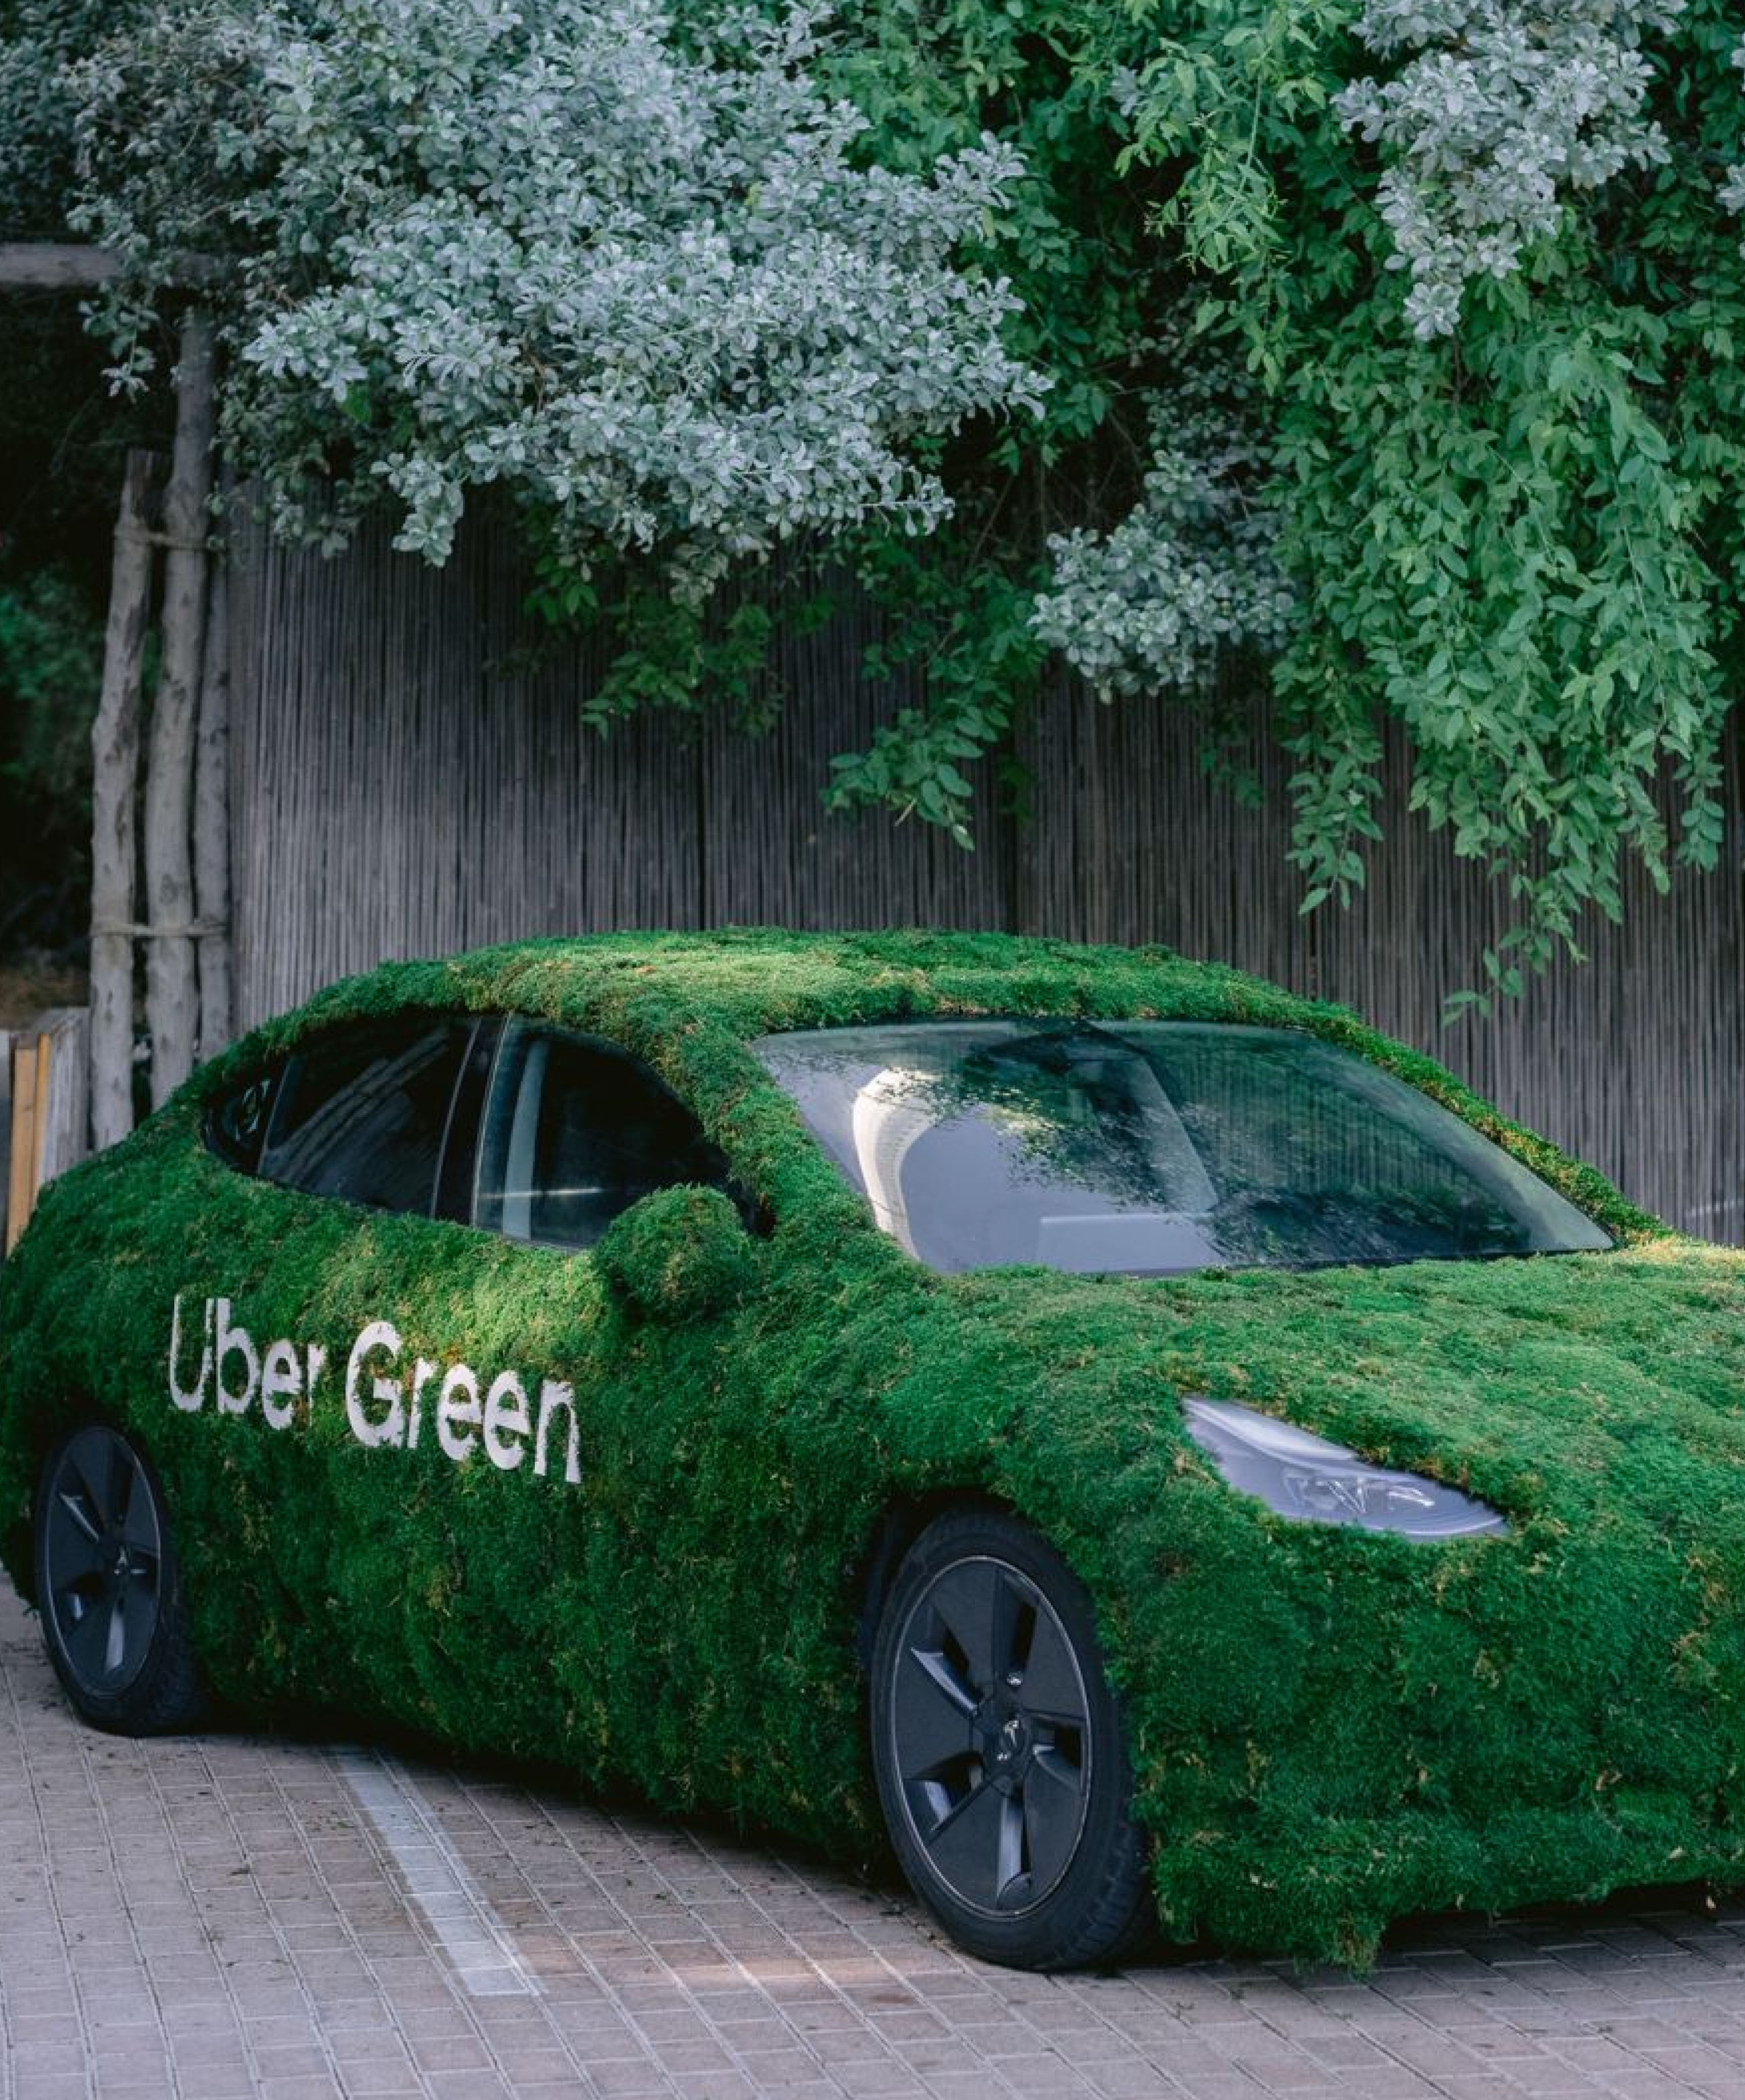 Atteline PR - Uber car with a grass in the UAE event